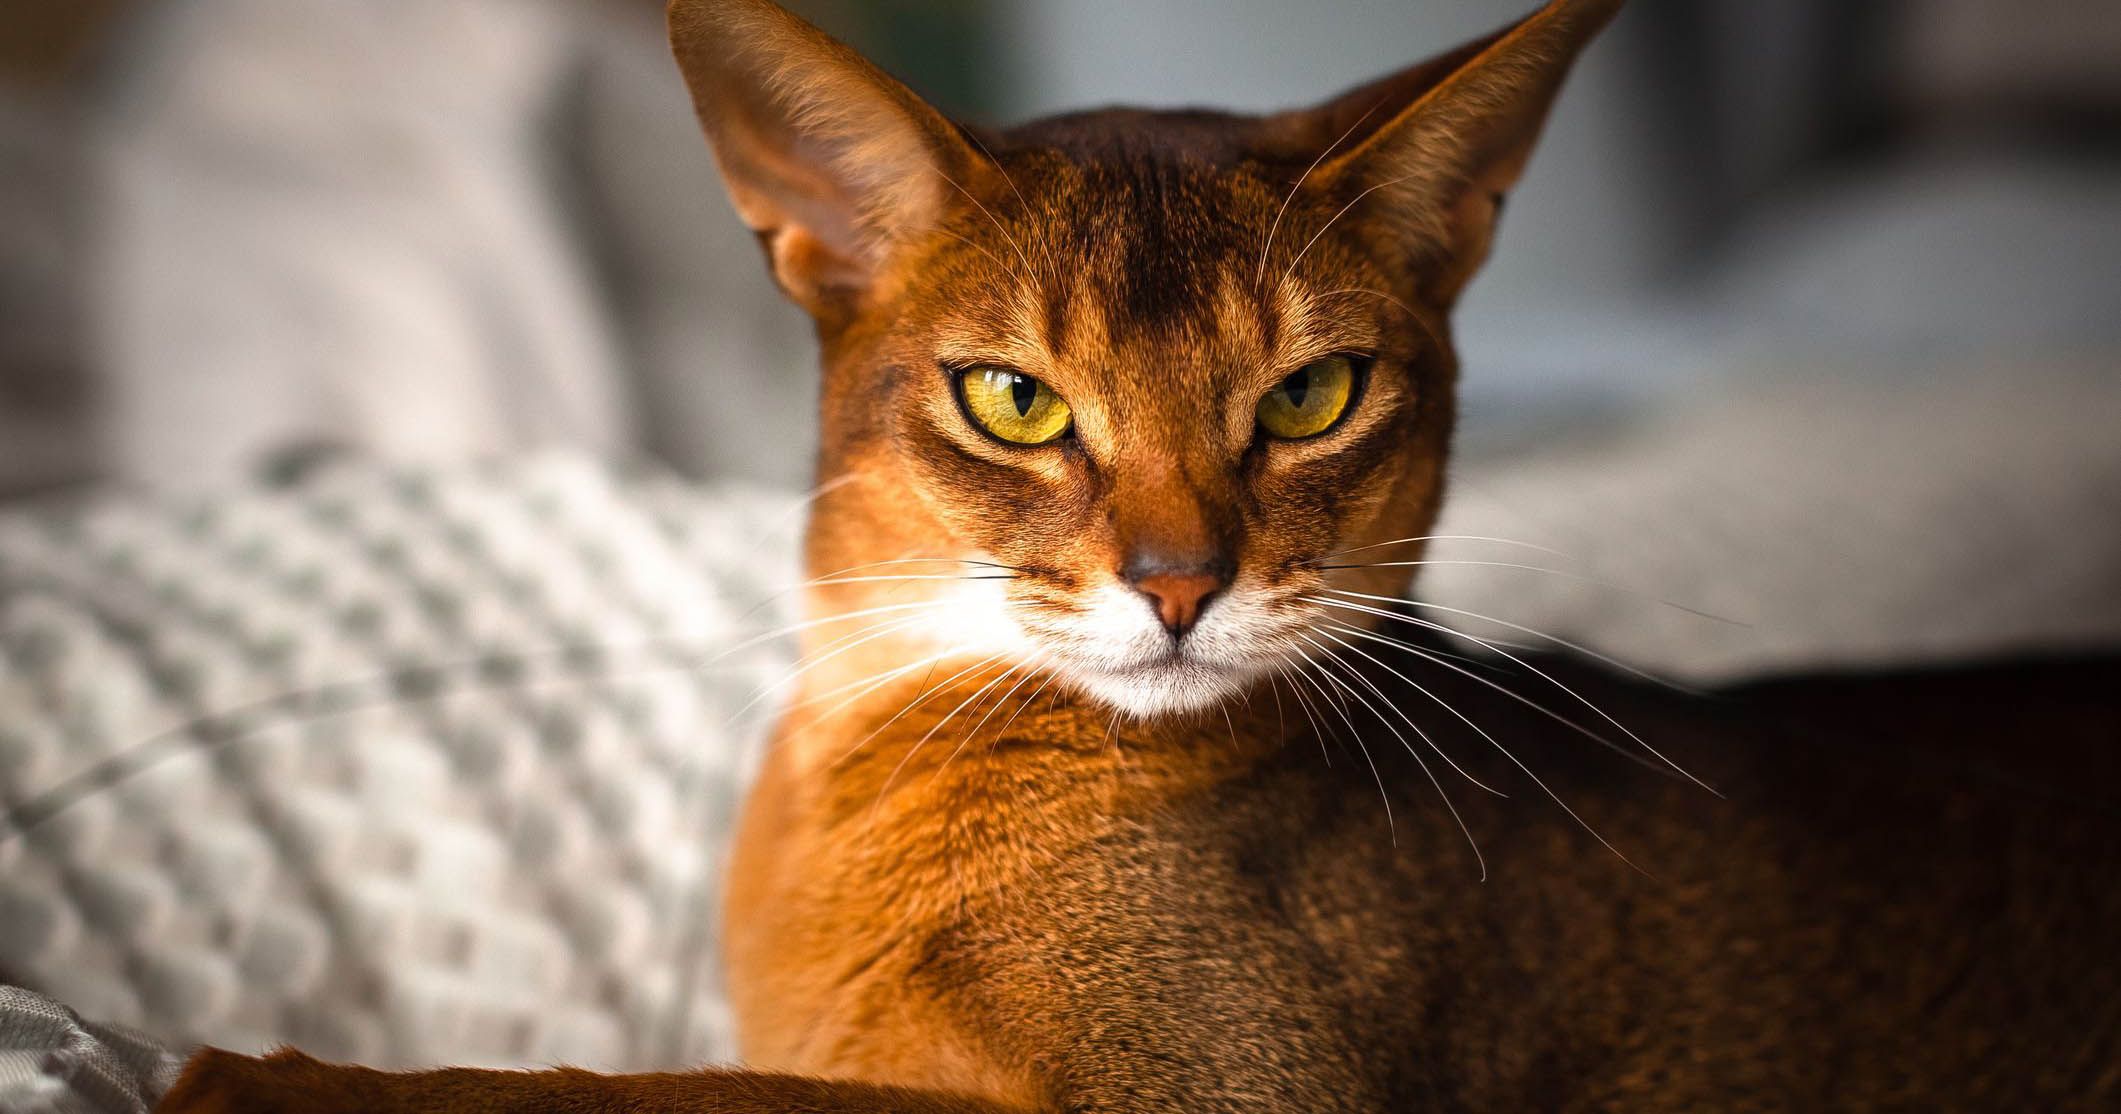 1. Kucing Abyssinian